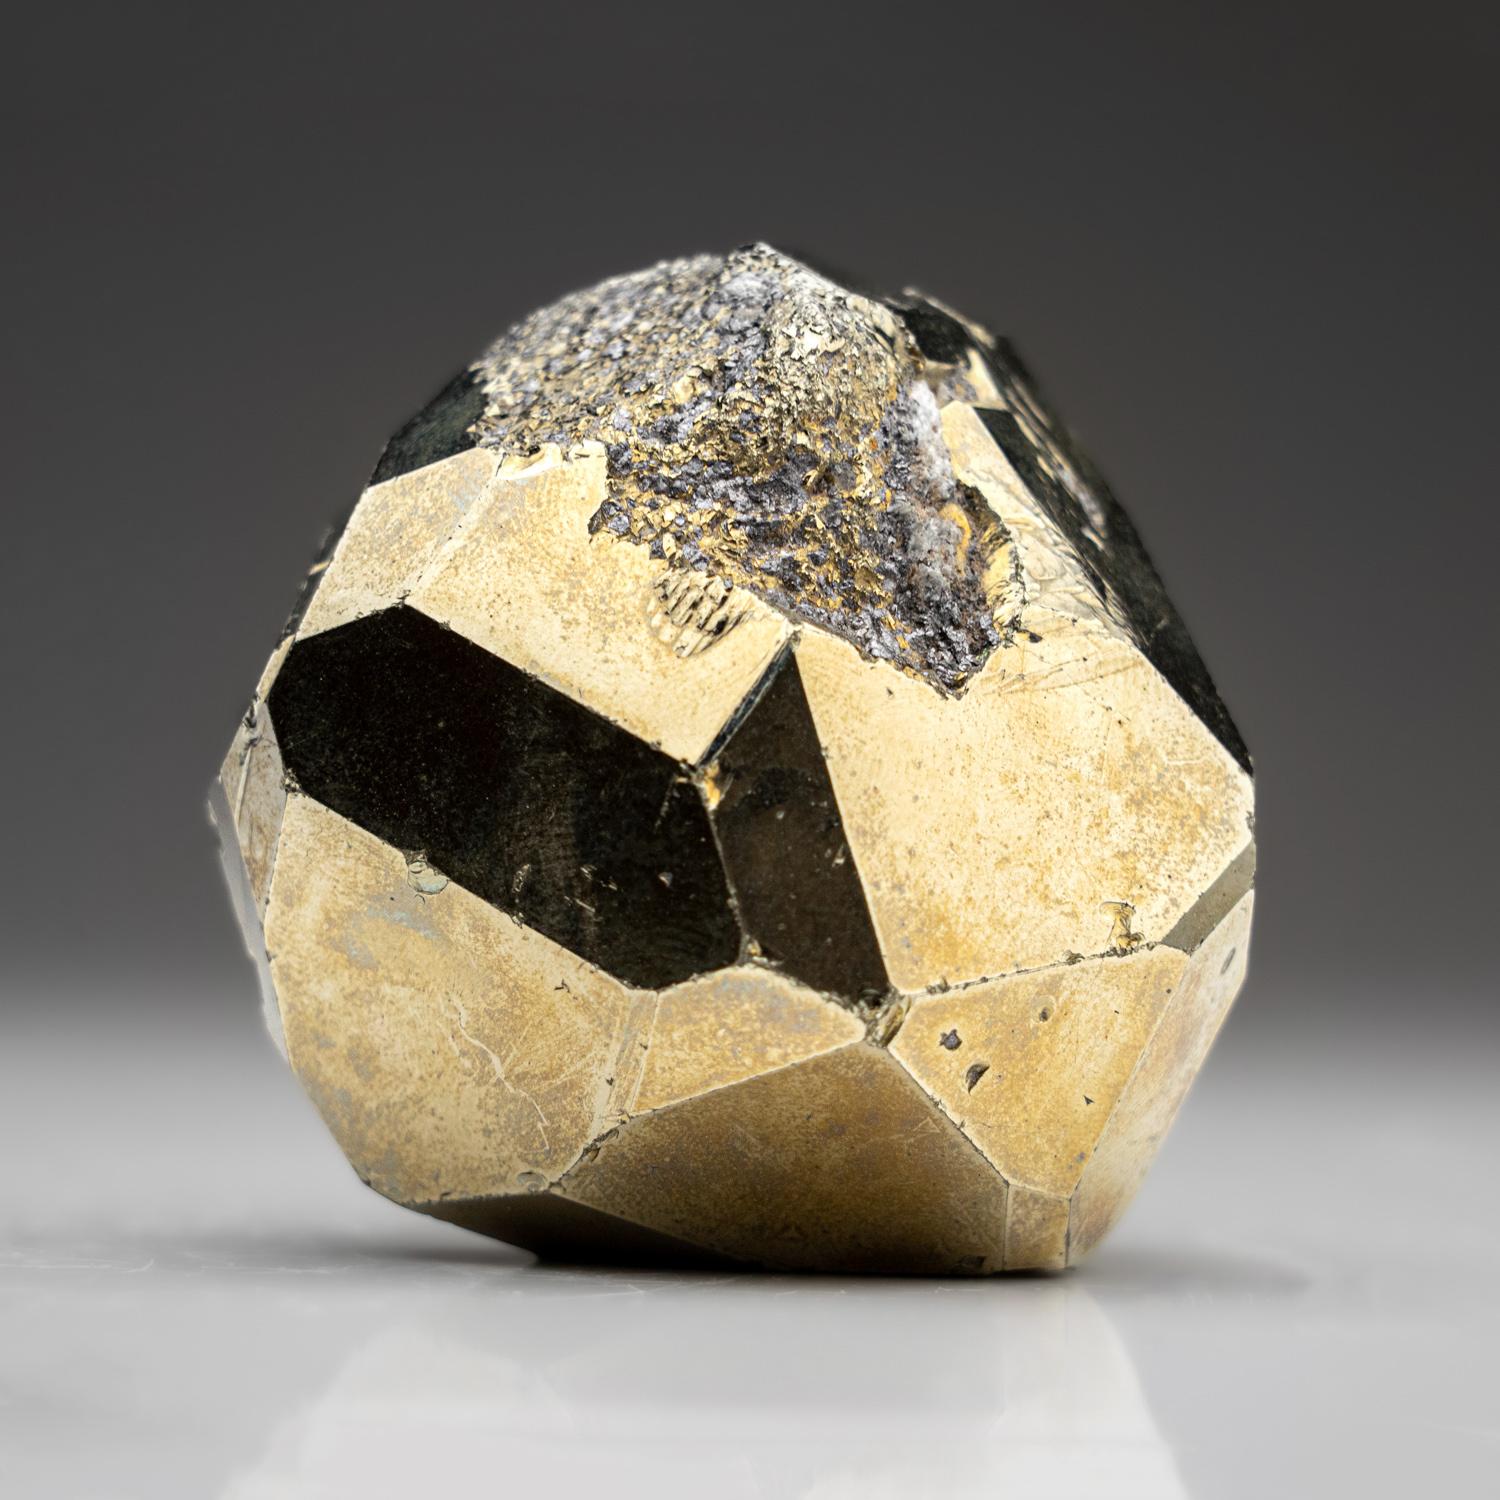 Lustrous yellow-metallic pyrite compound crystal with remnants of tan-colored matrix on the bottom. The pyrite crystal is cubo-octahedral form with striated cubic faces and layered parallel octahedral faces.

You will receive the exact object in